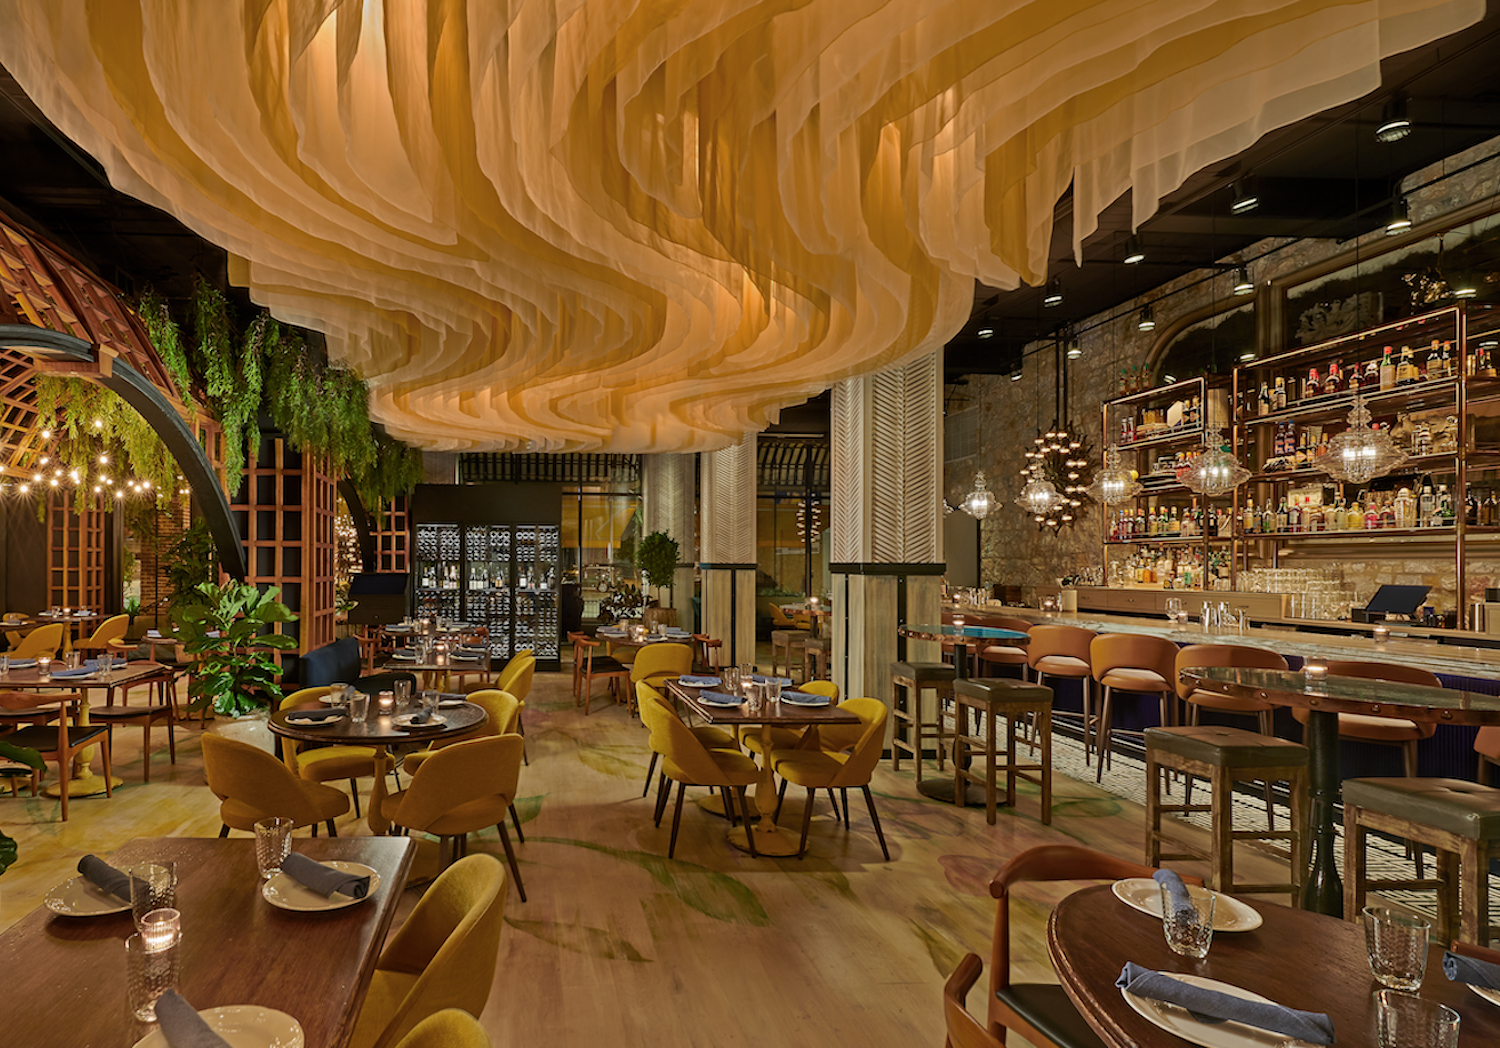 Interior of Alla Vita with yellow chairs, booth seats circular tables and a large bar with high-top seating in a dark brown/wooden/brick wall interior, surrounded by greenery